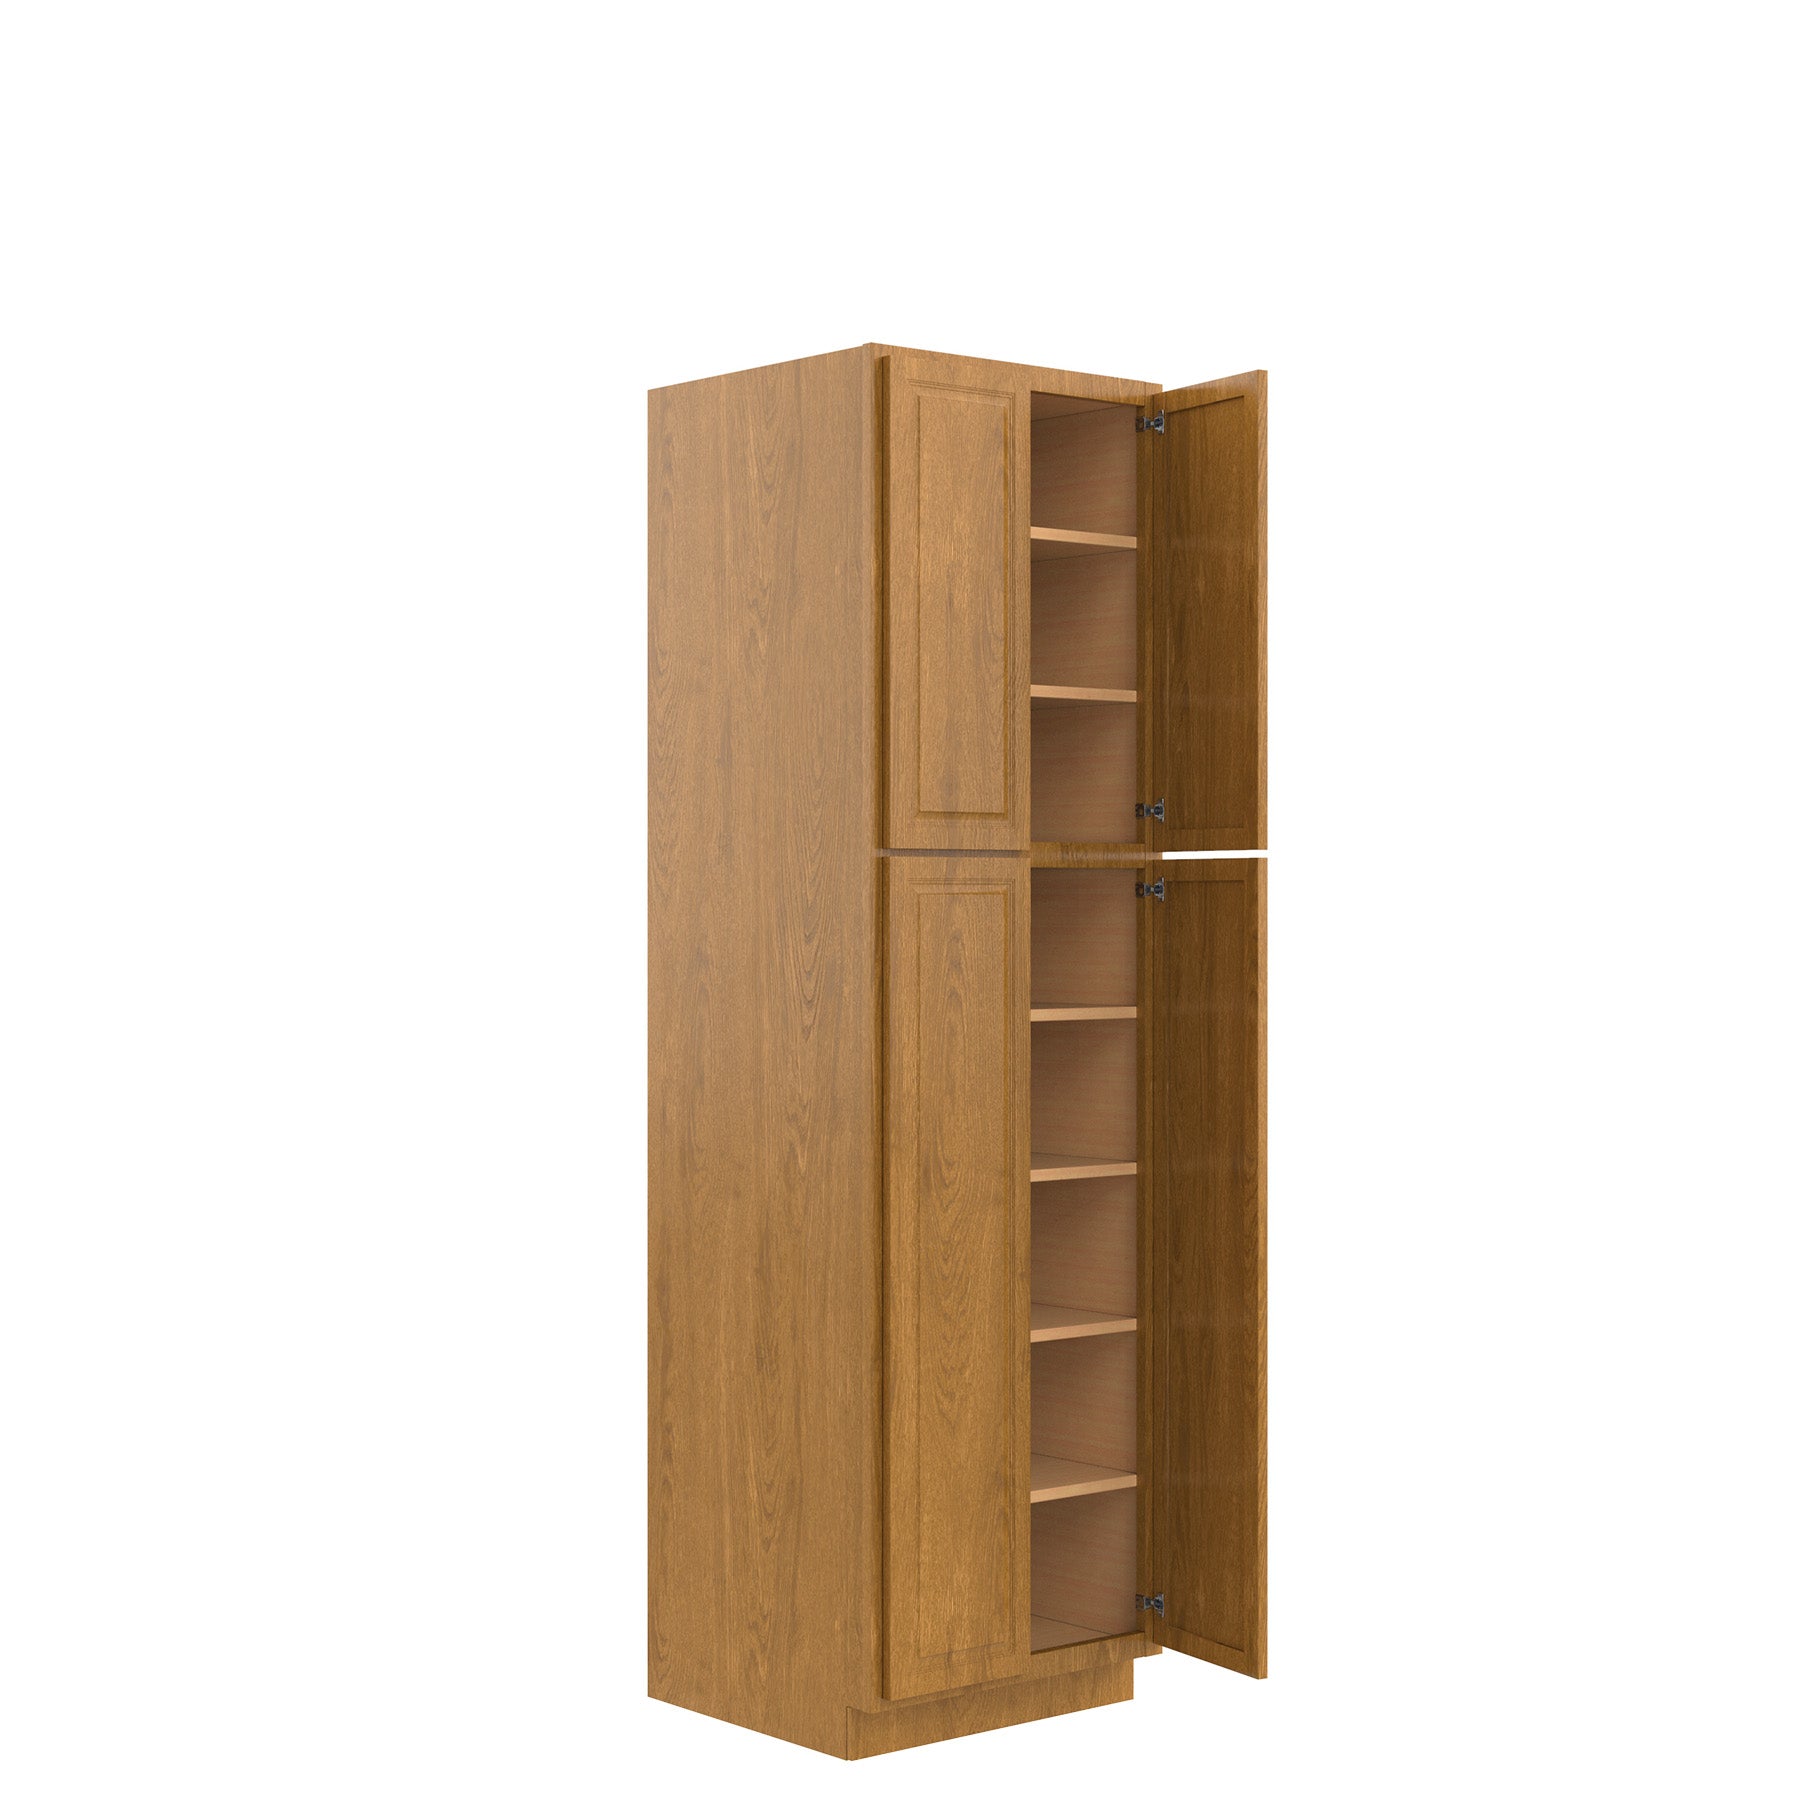 RTA - Country Oak - Double Door Tall Cabinet | 24"W x 84"H x 24"D